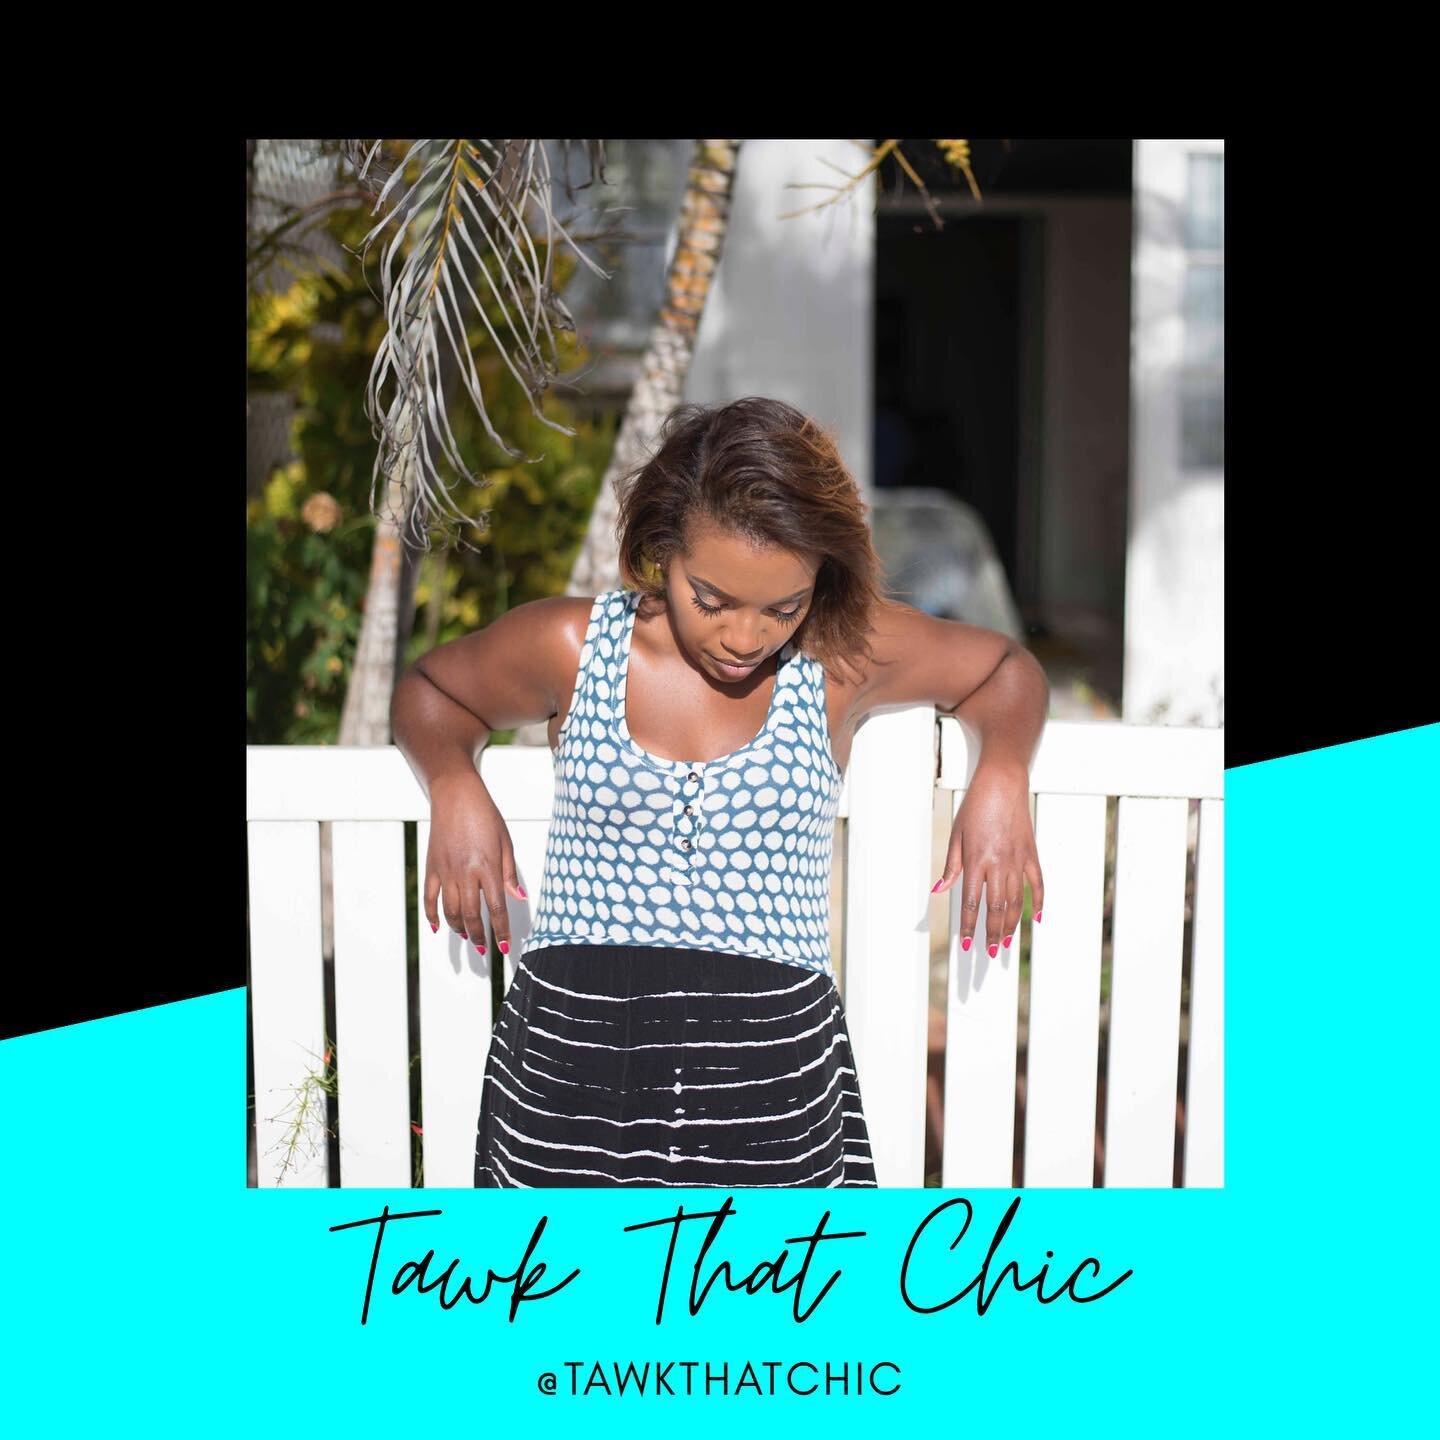 Just to give you a little background, I wanted to create a lifestyle blog that would inspire young women who are looking to fulfill their purpose yet don't know exactly where to begin. 

Consider Tawk That Chic a girl's guide to get there. It's a sha